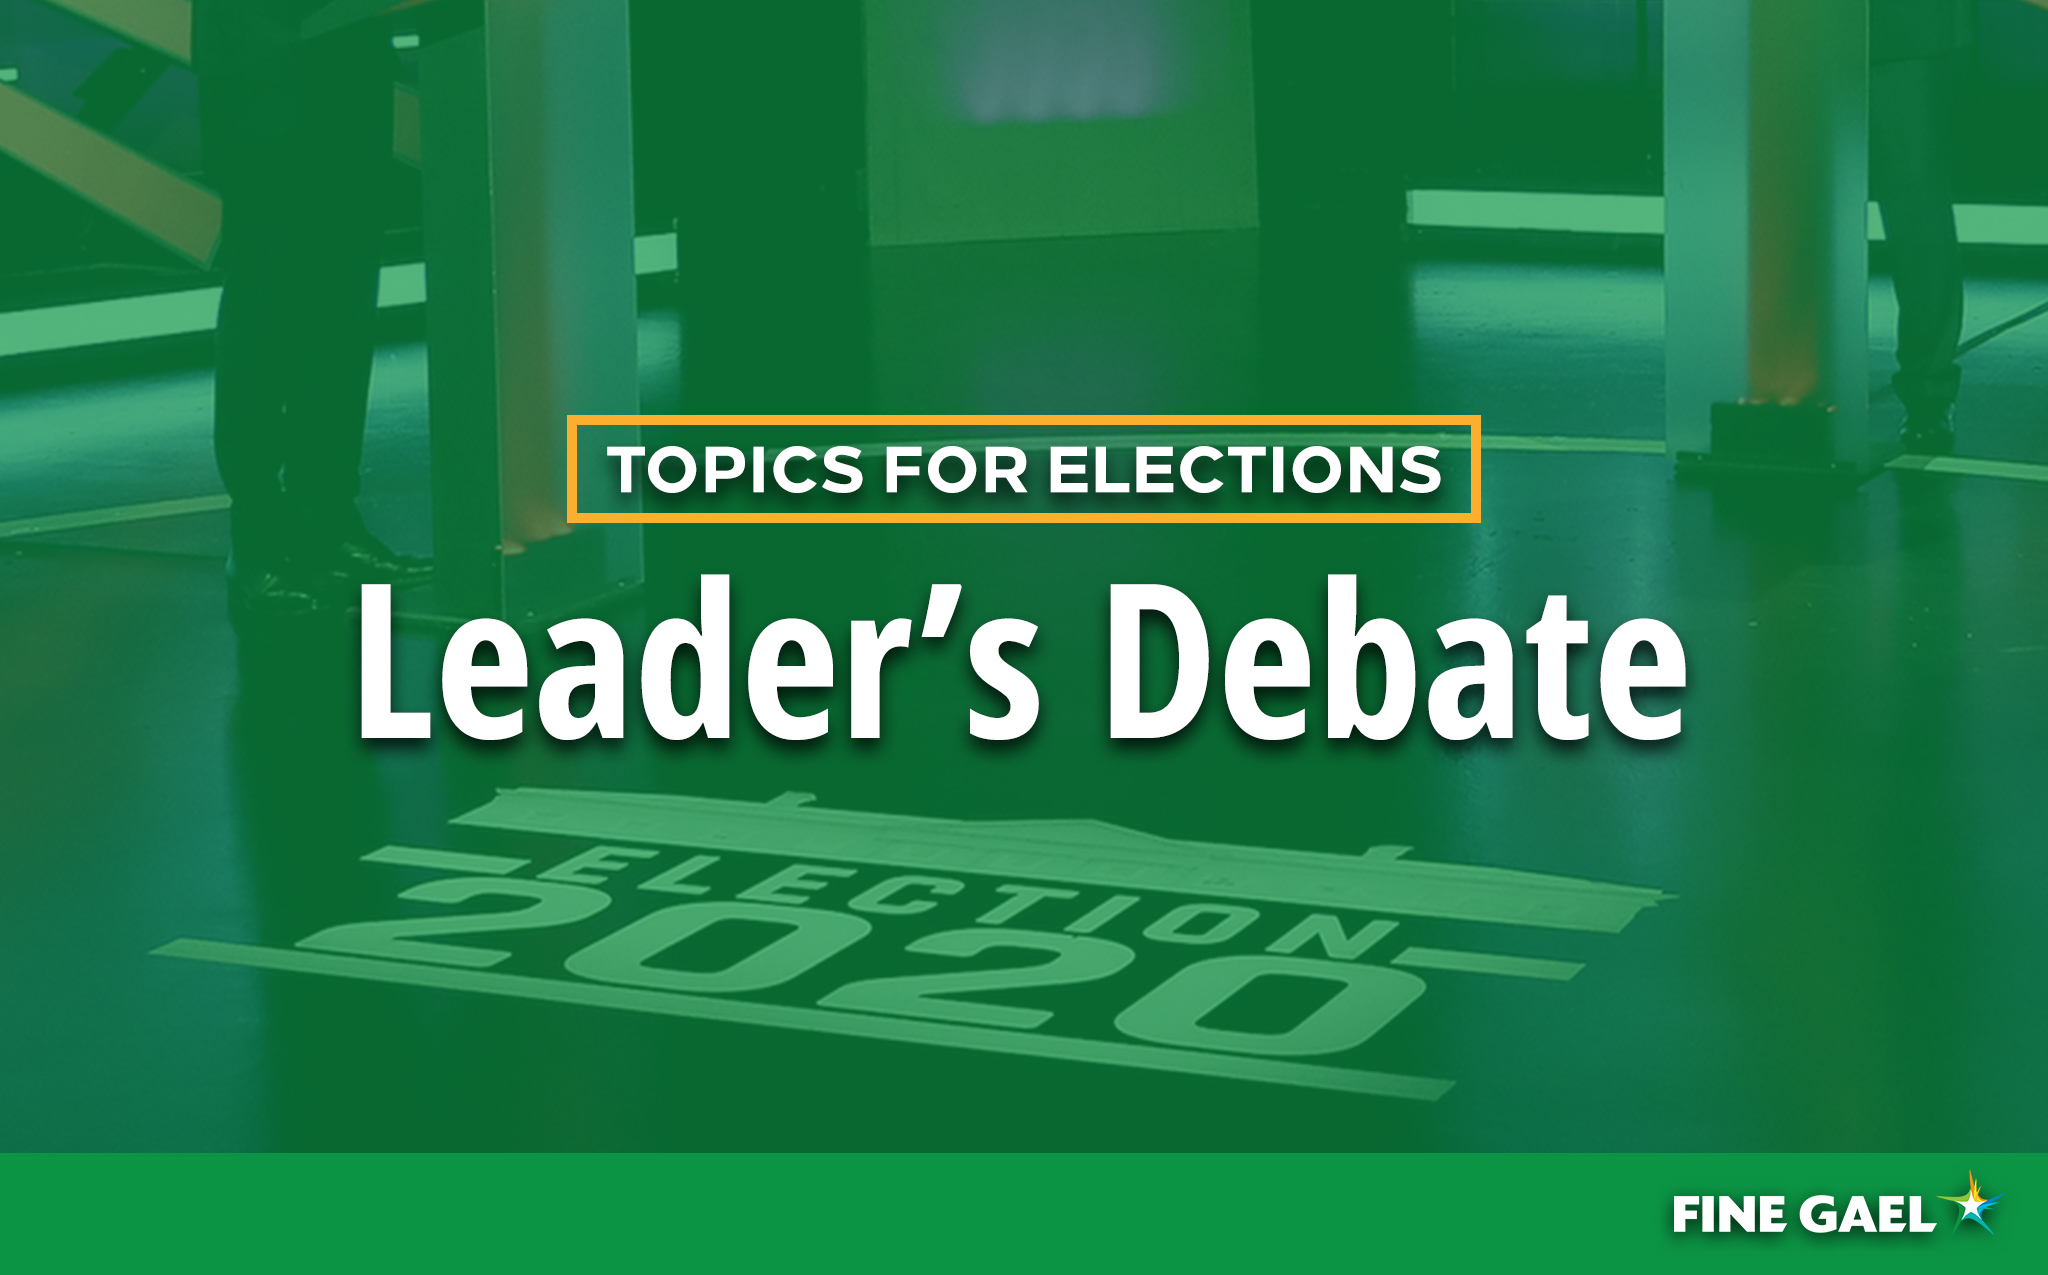 Topics for Elections Leader's Debate